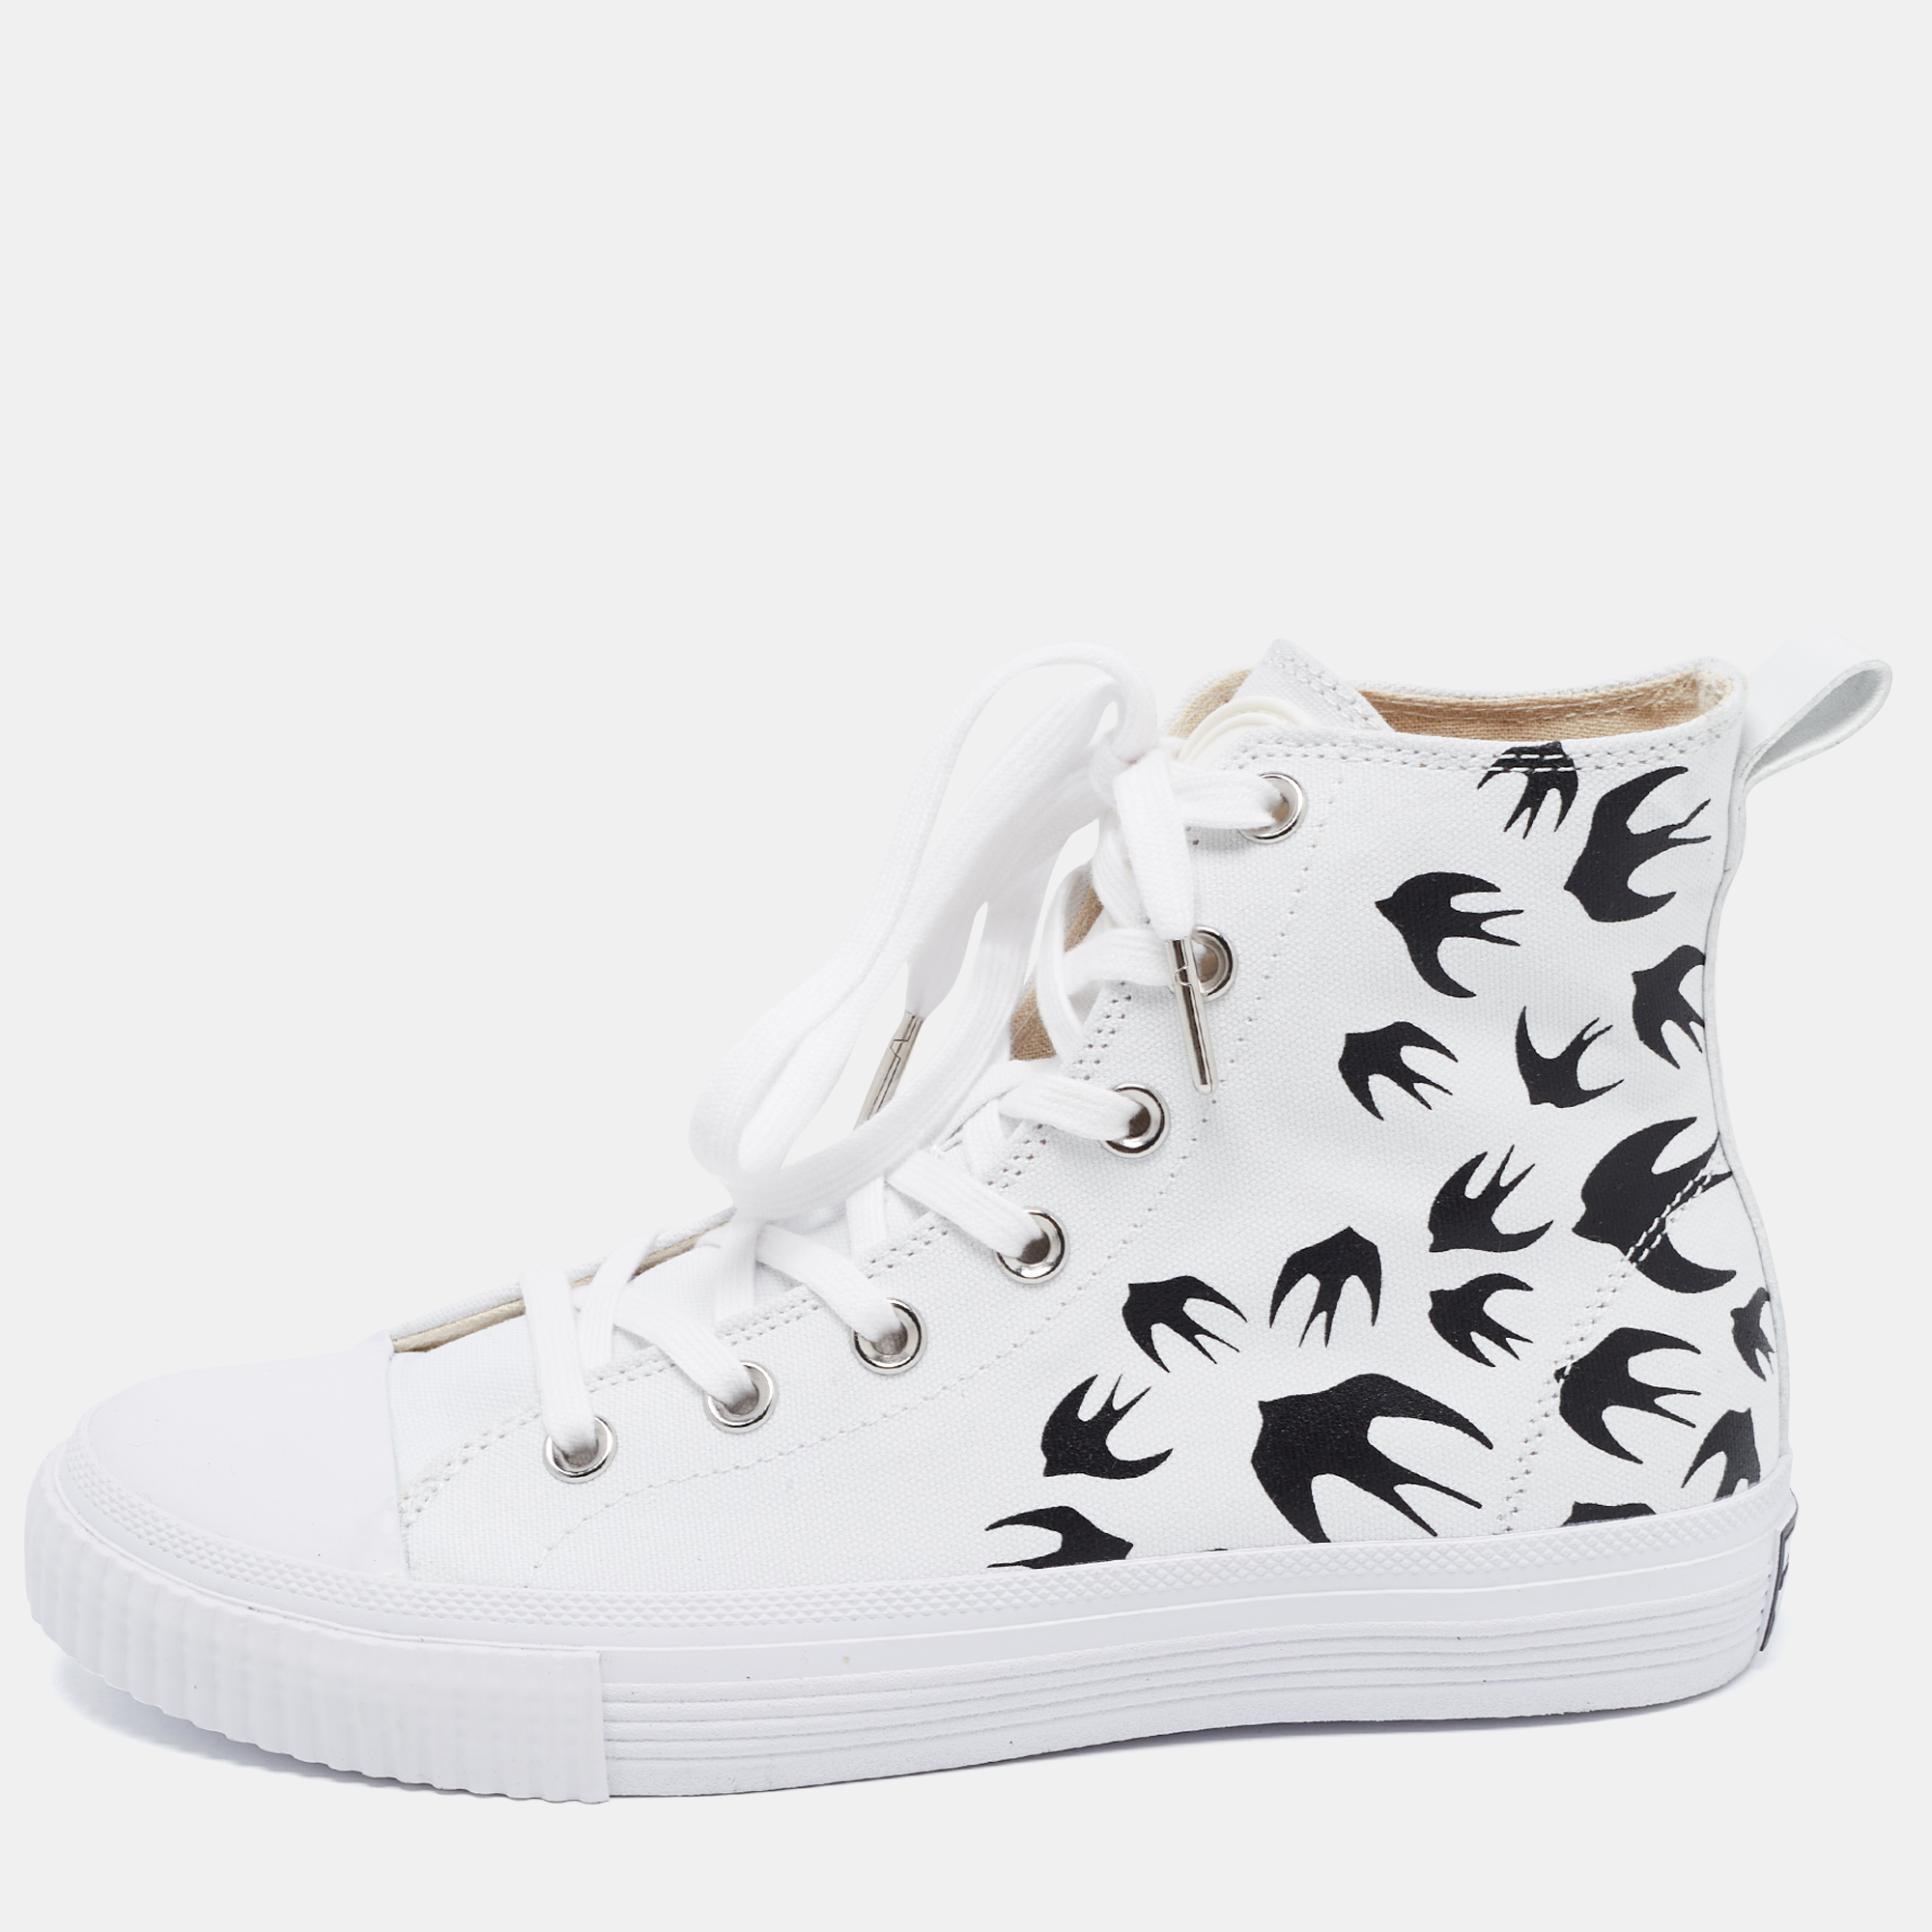 Mcq by alexander mcqueen mcq white canvas swallow plimsoll high top sneakers size 39